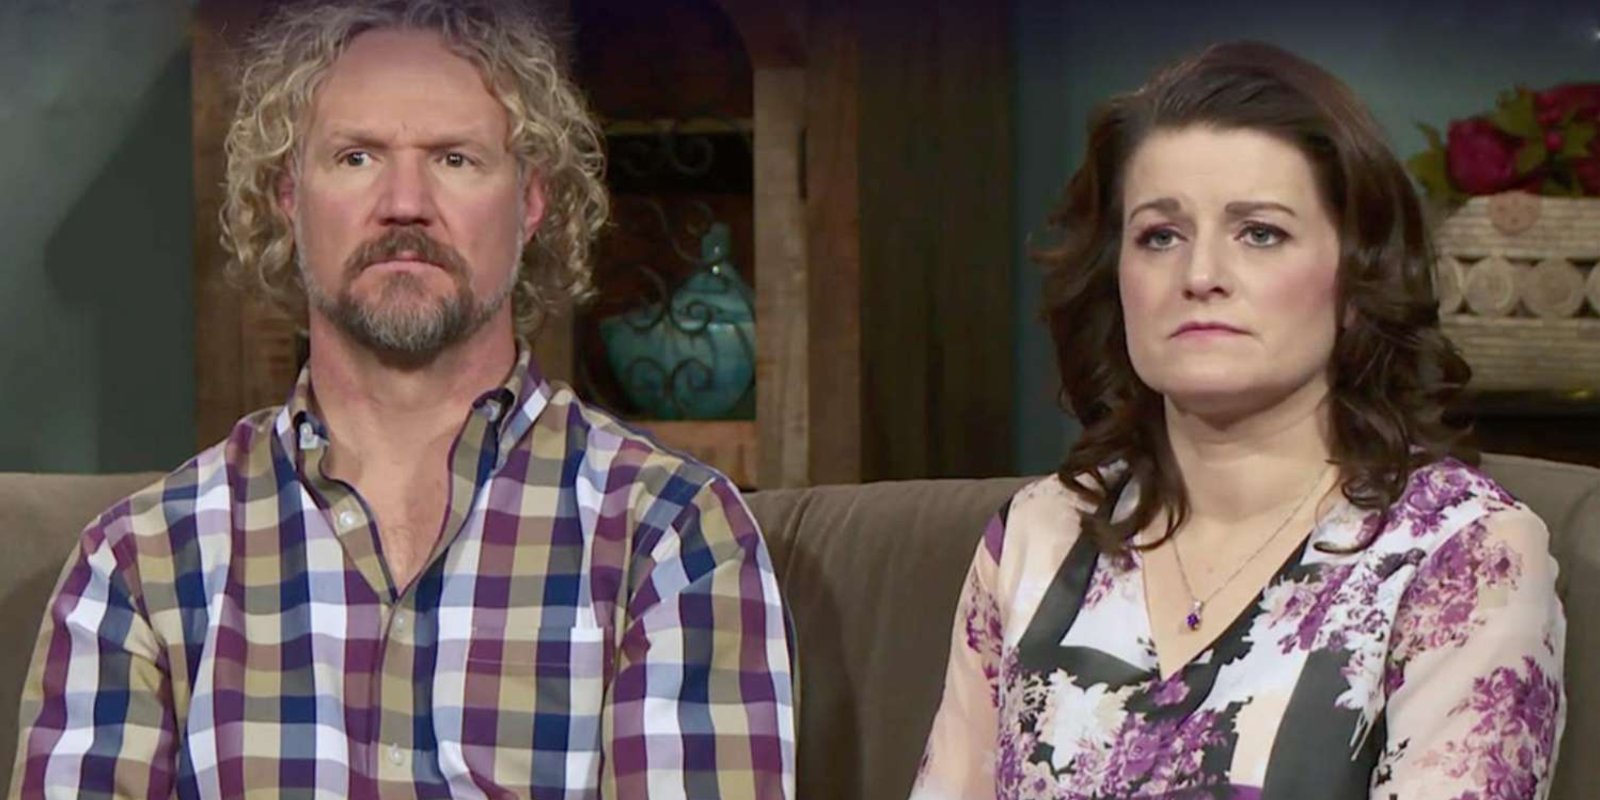 'Sister Wives' stars Kody and Robyn Brown pose during a confessional for the TLC series.